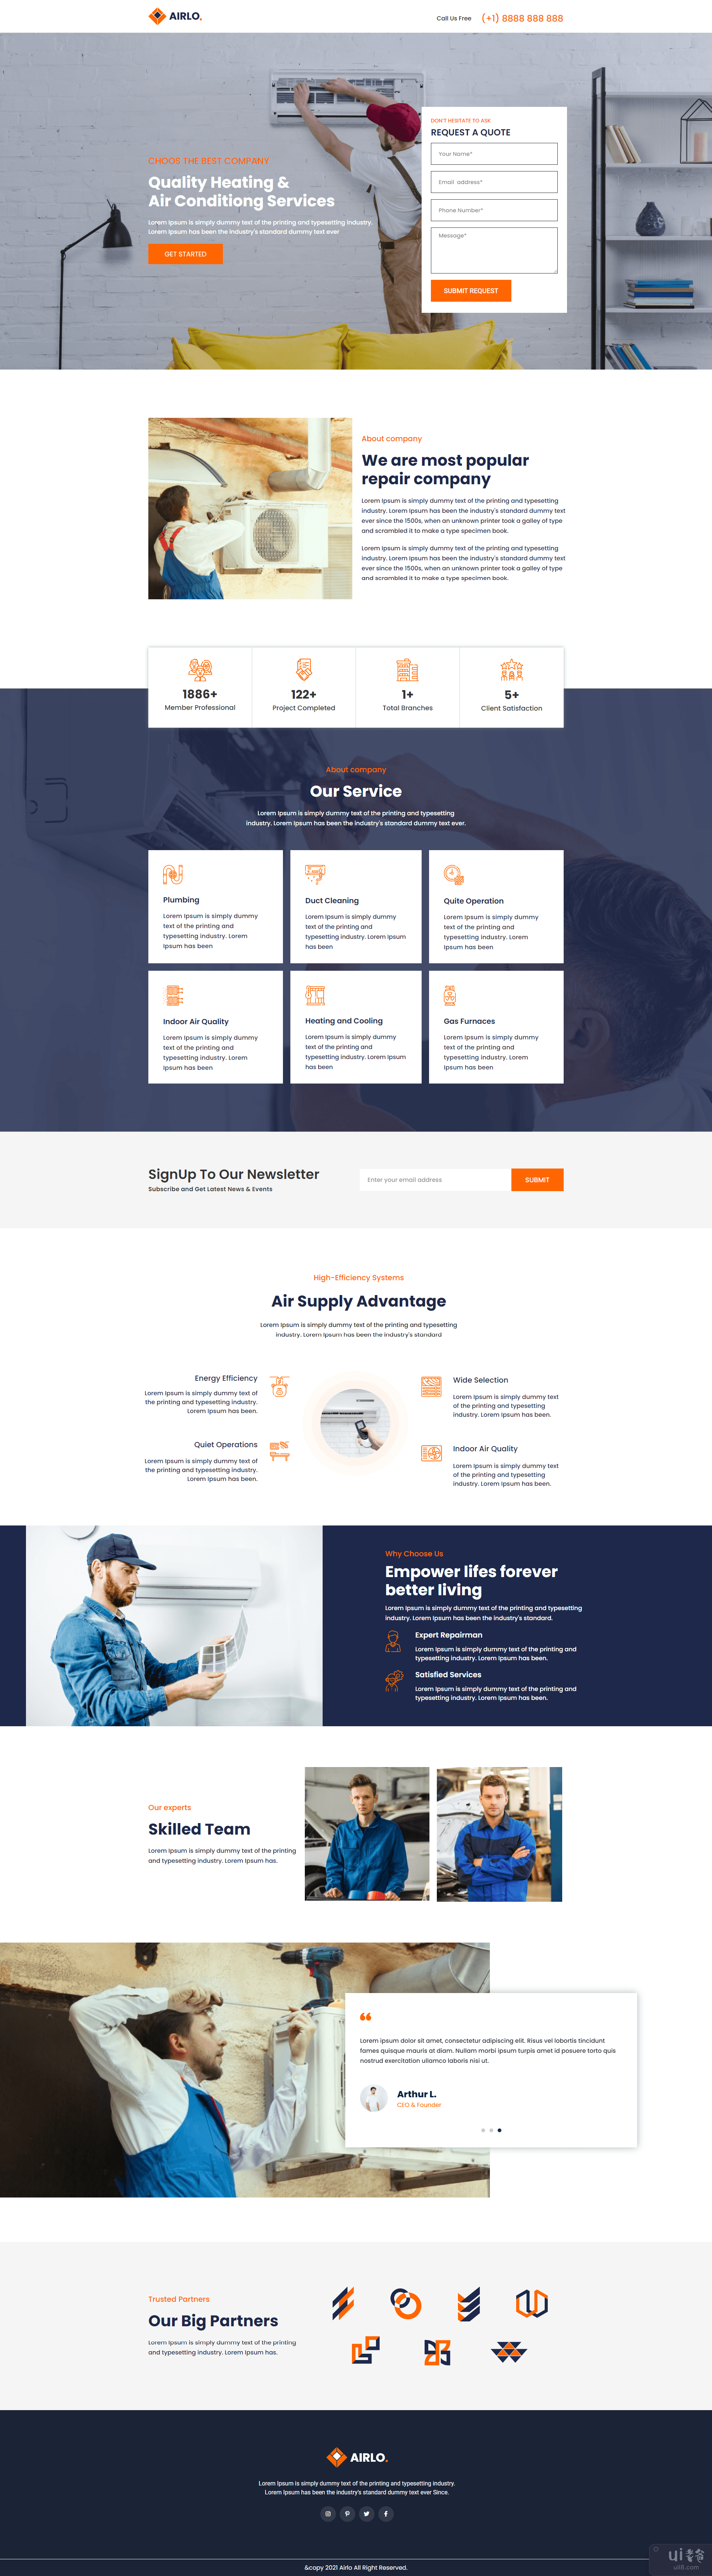 Airlo Ac 服务登陆页面(Airlo Ac Services Landing Page)插图2